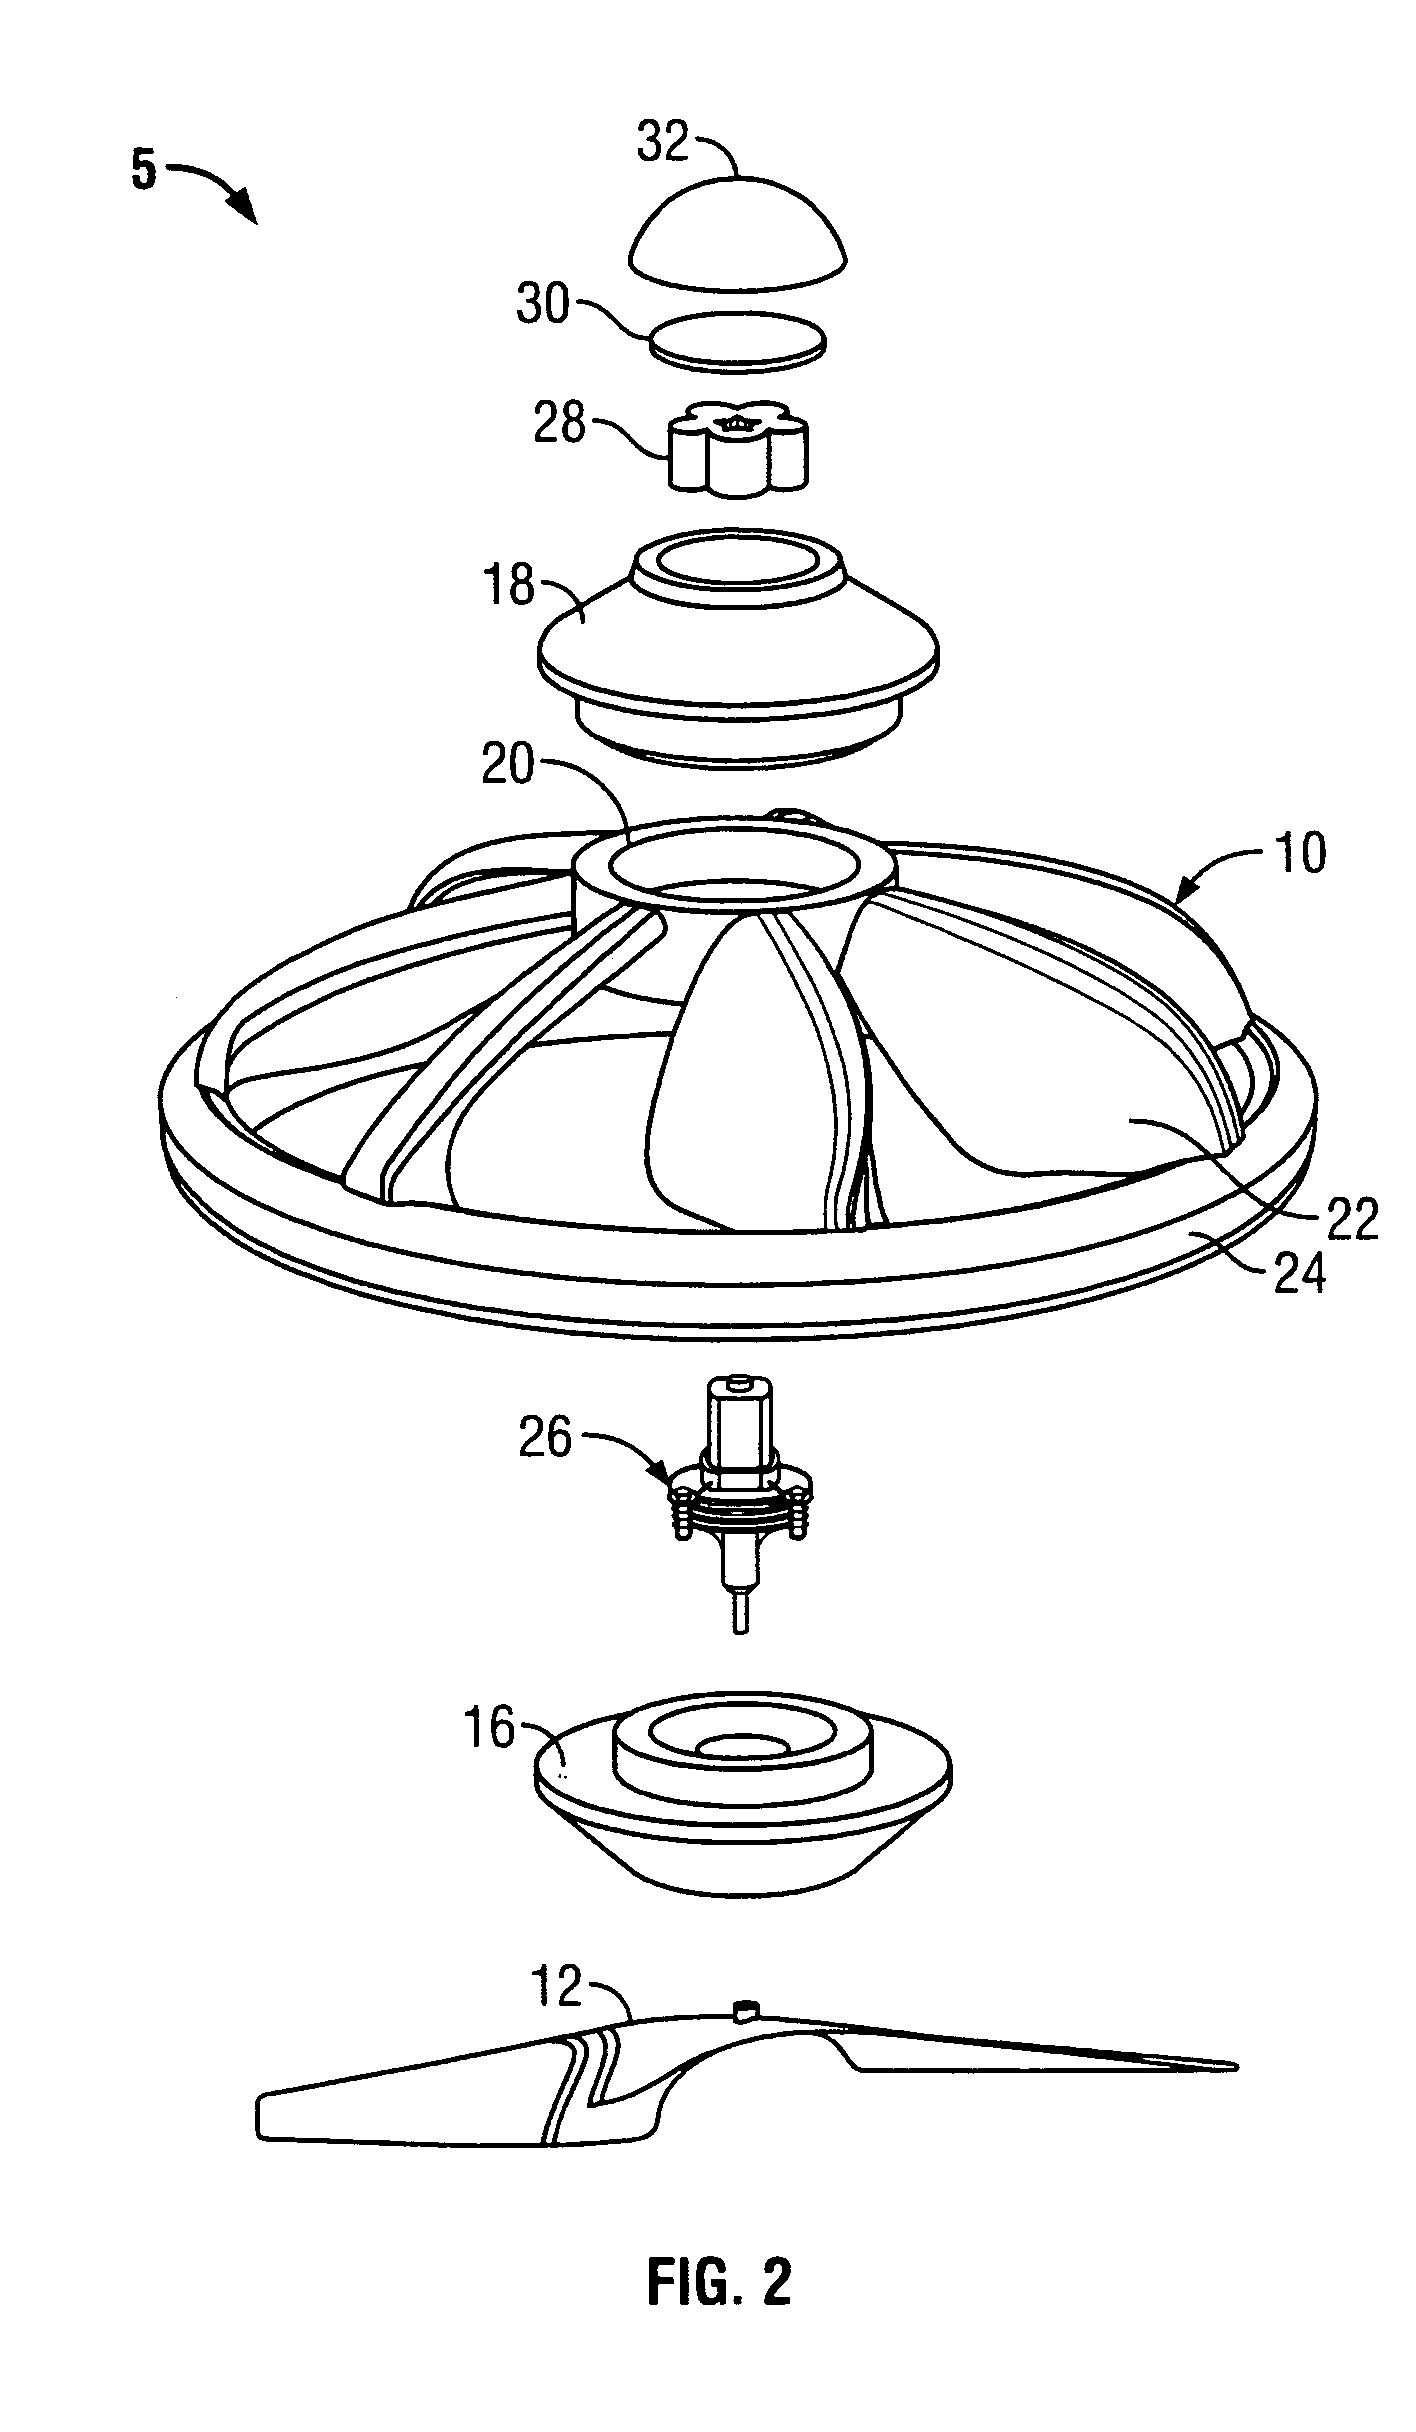 Self-stabilizing rotating toy